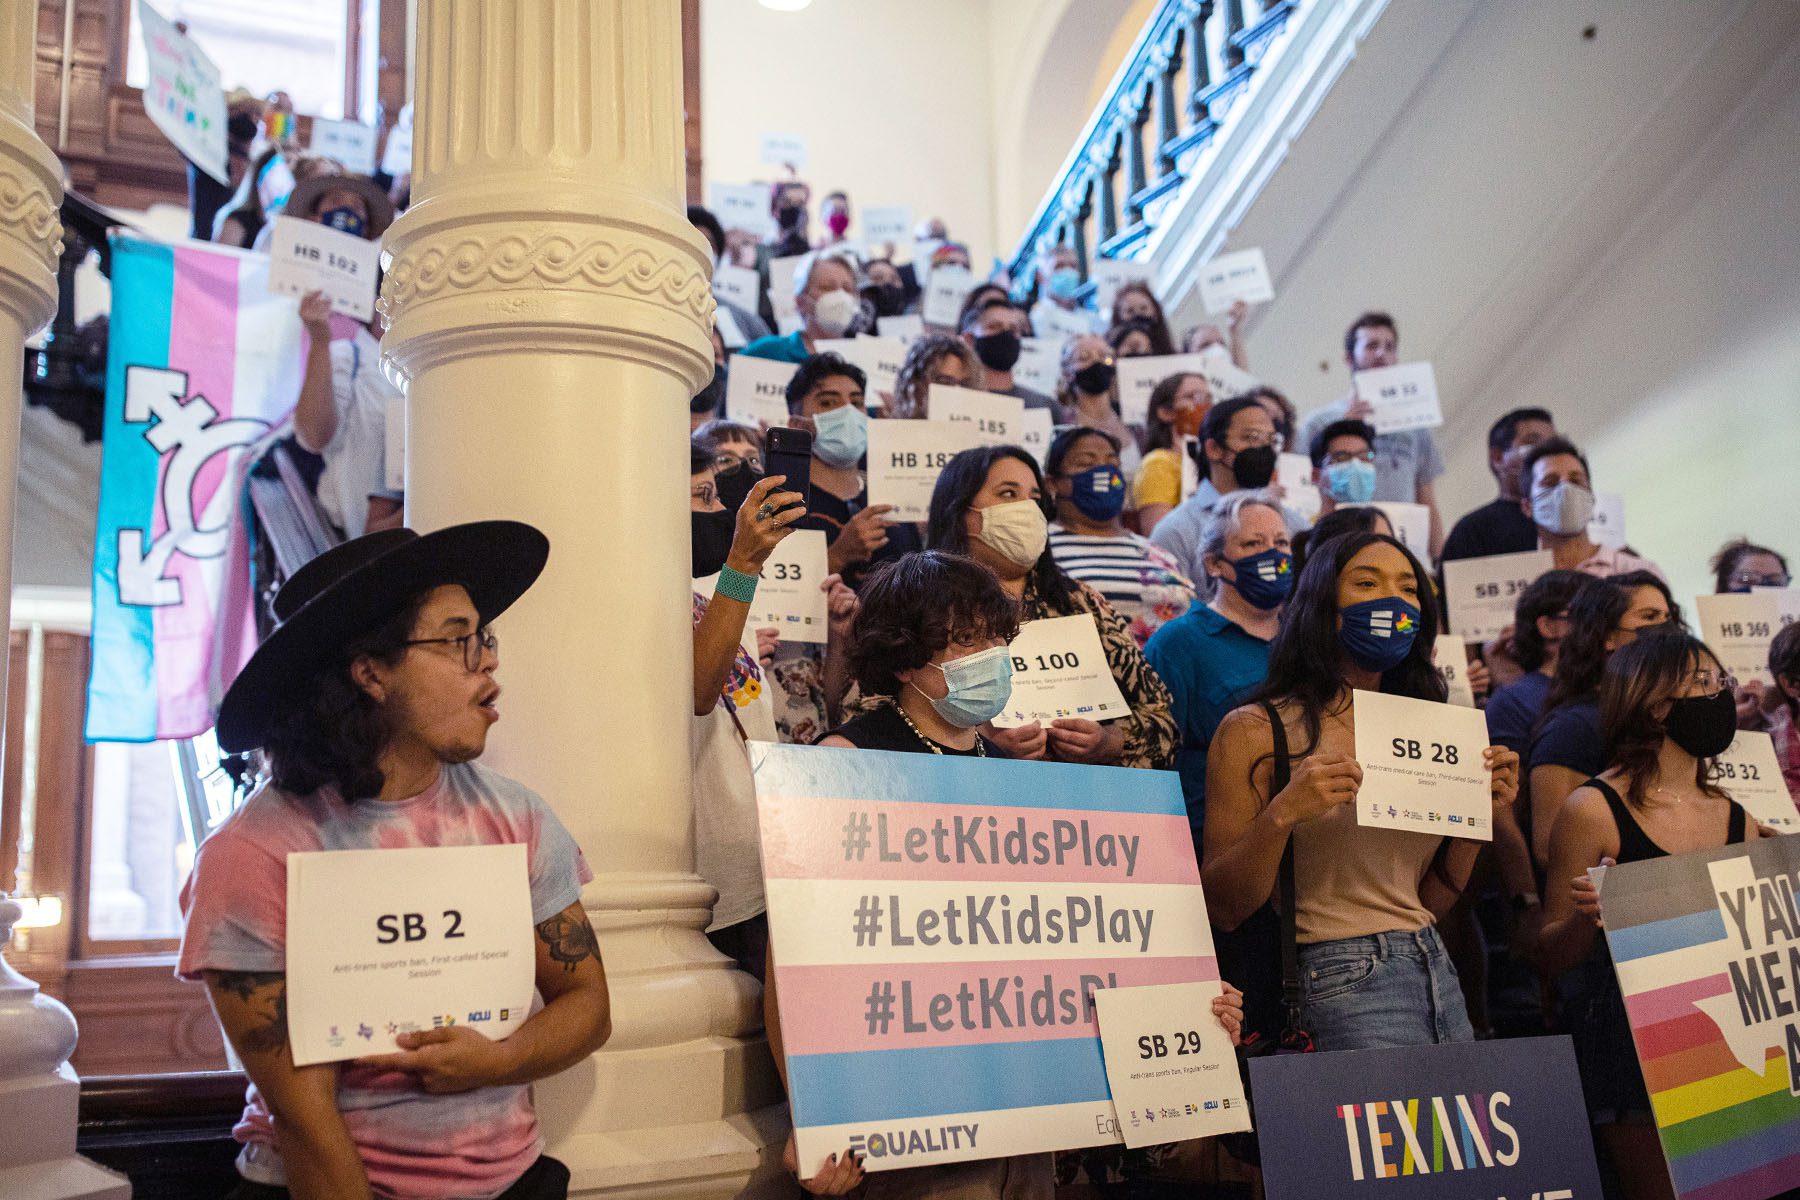 People gather at the Texas State Capitol to protest efforts to pass legislation that would restrict the participation of transgender student athletes in sports.